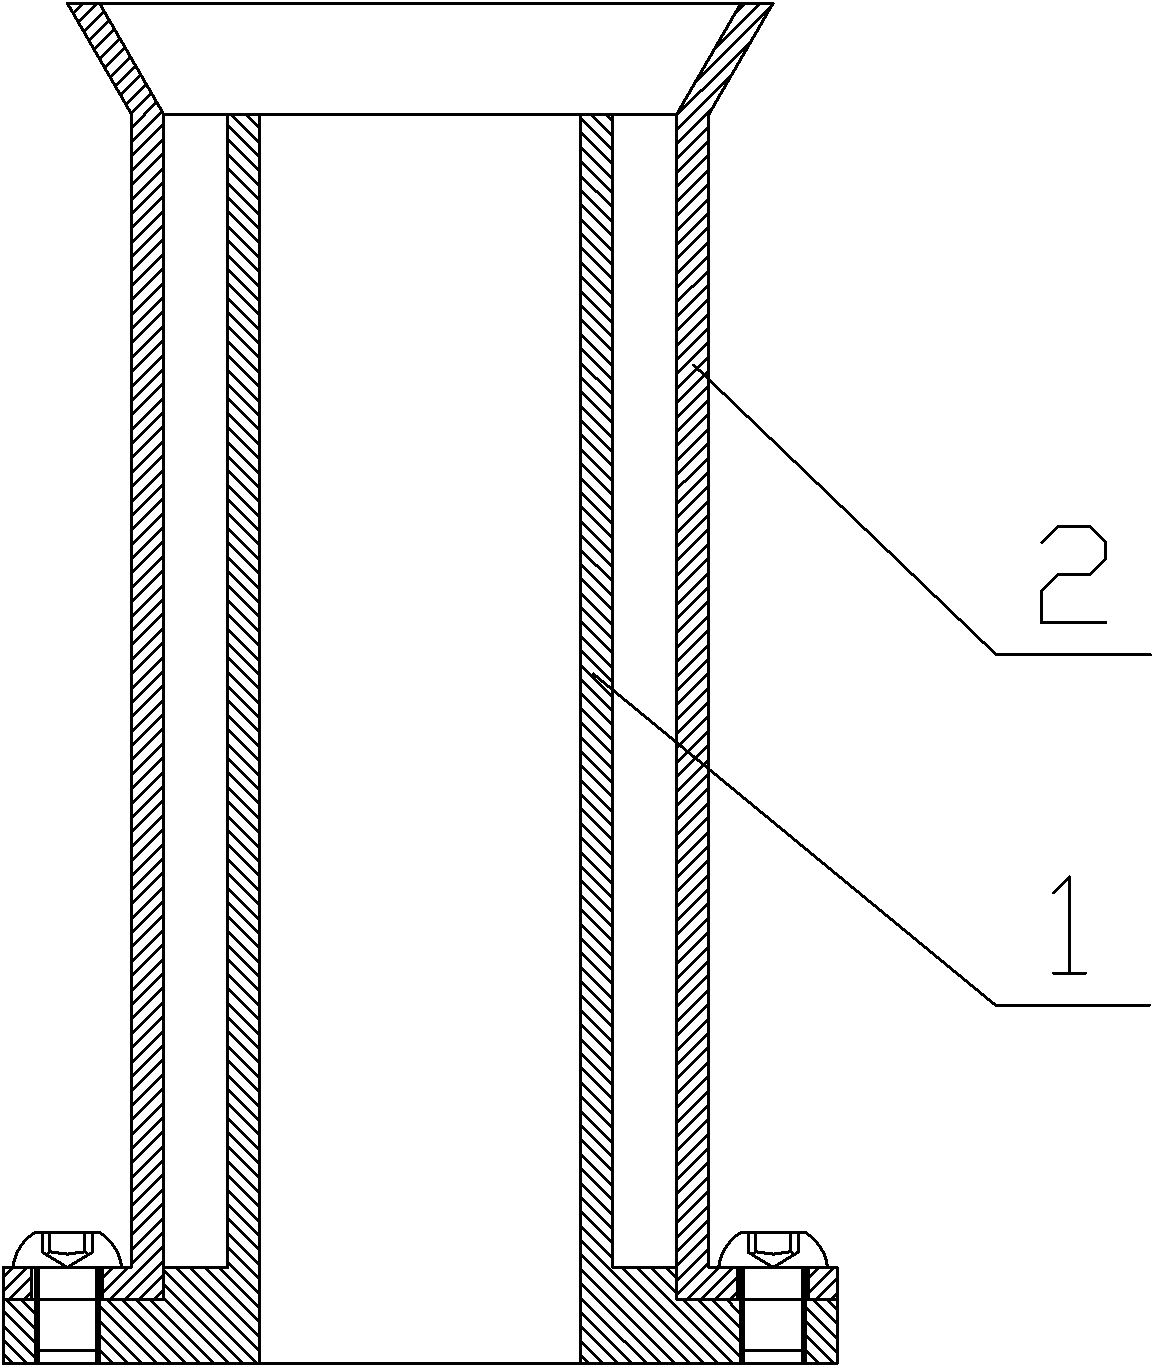 Method for manufacturing shape memory polymer core mold by winding composite material component